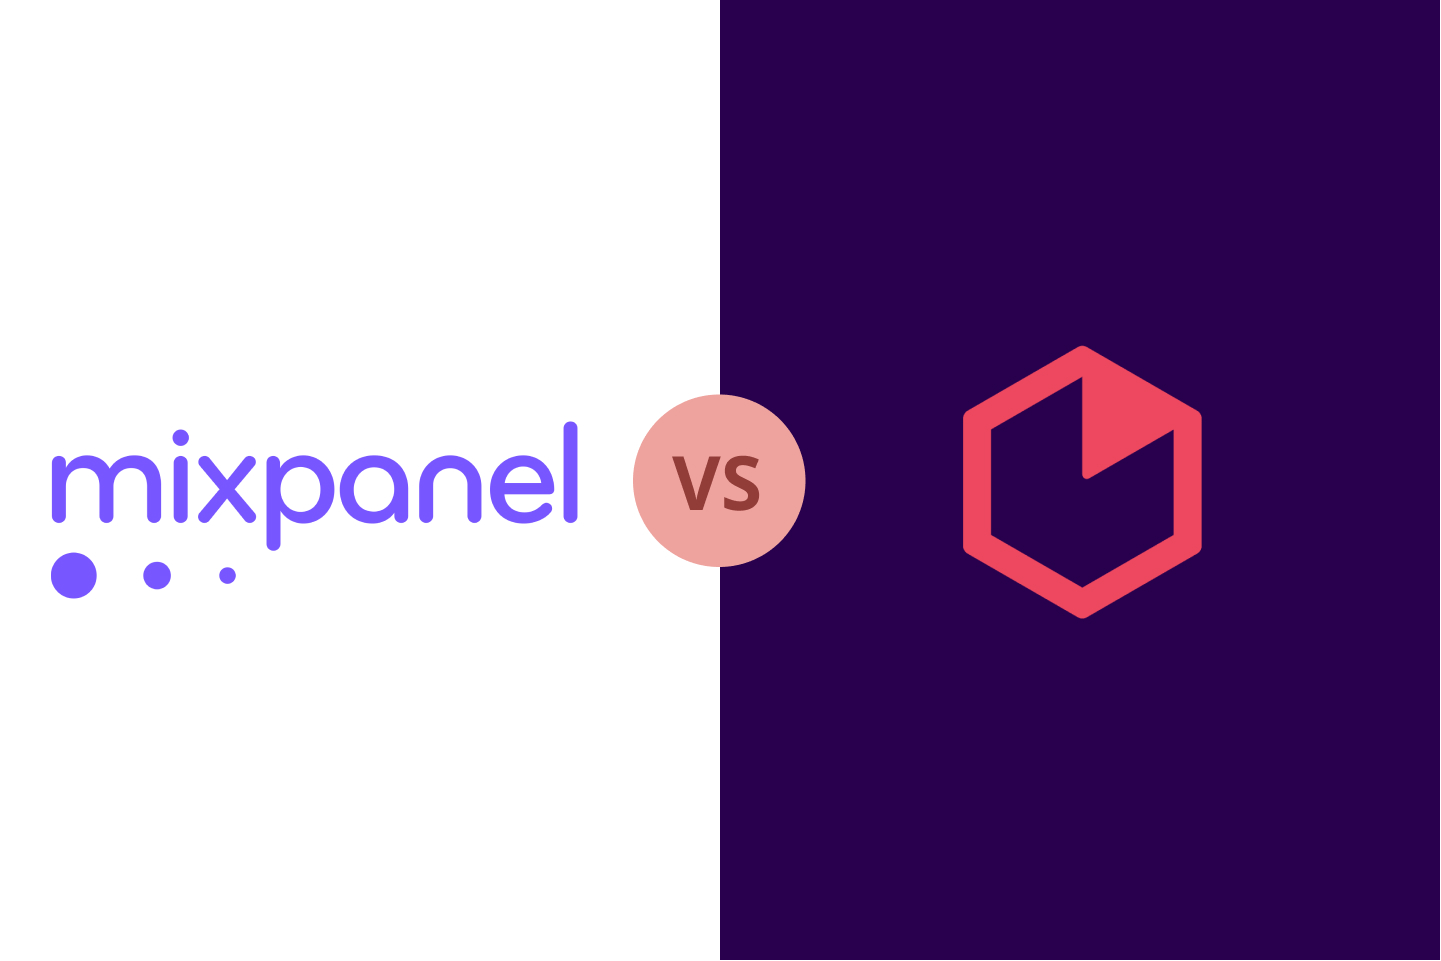 Mixpanel vs Heap: Which One Is Better In 2022?